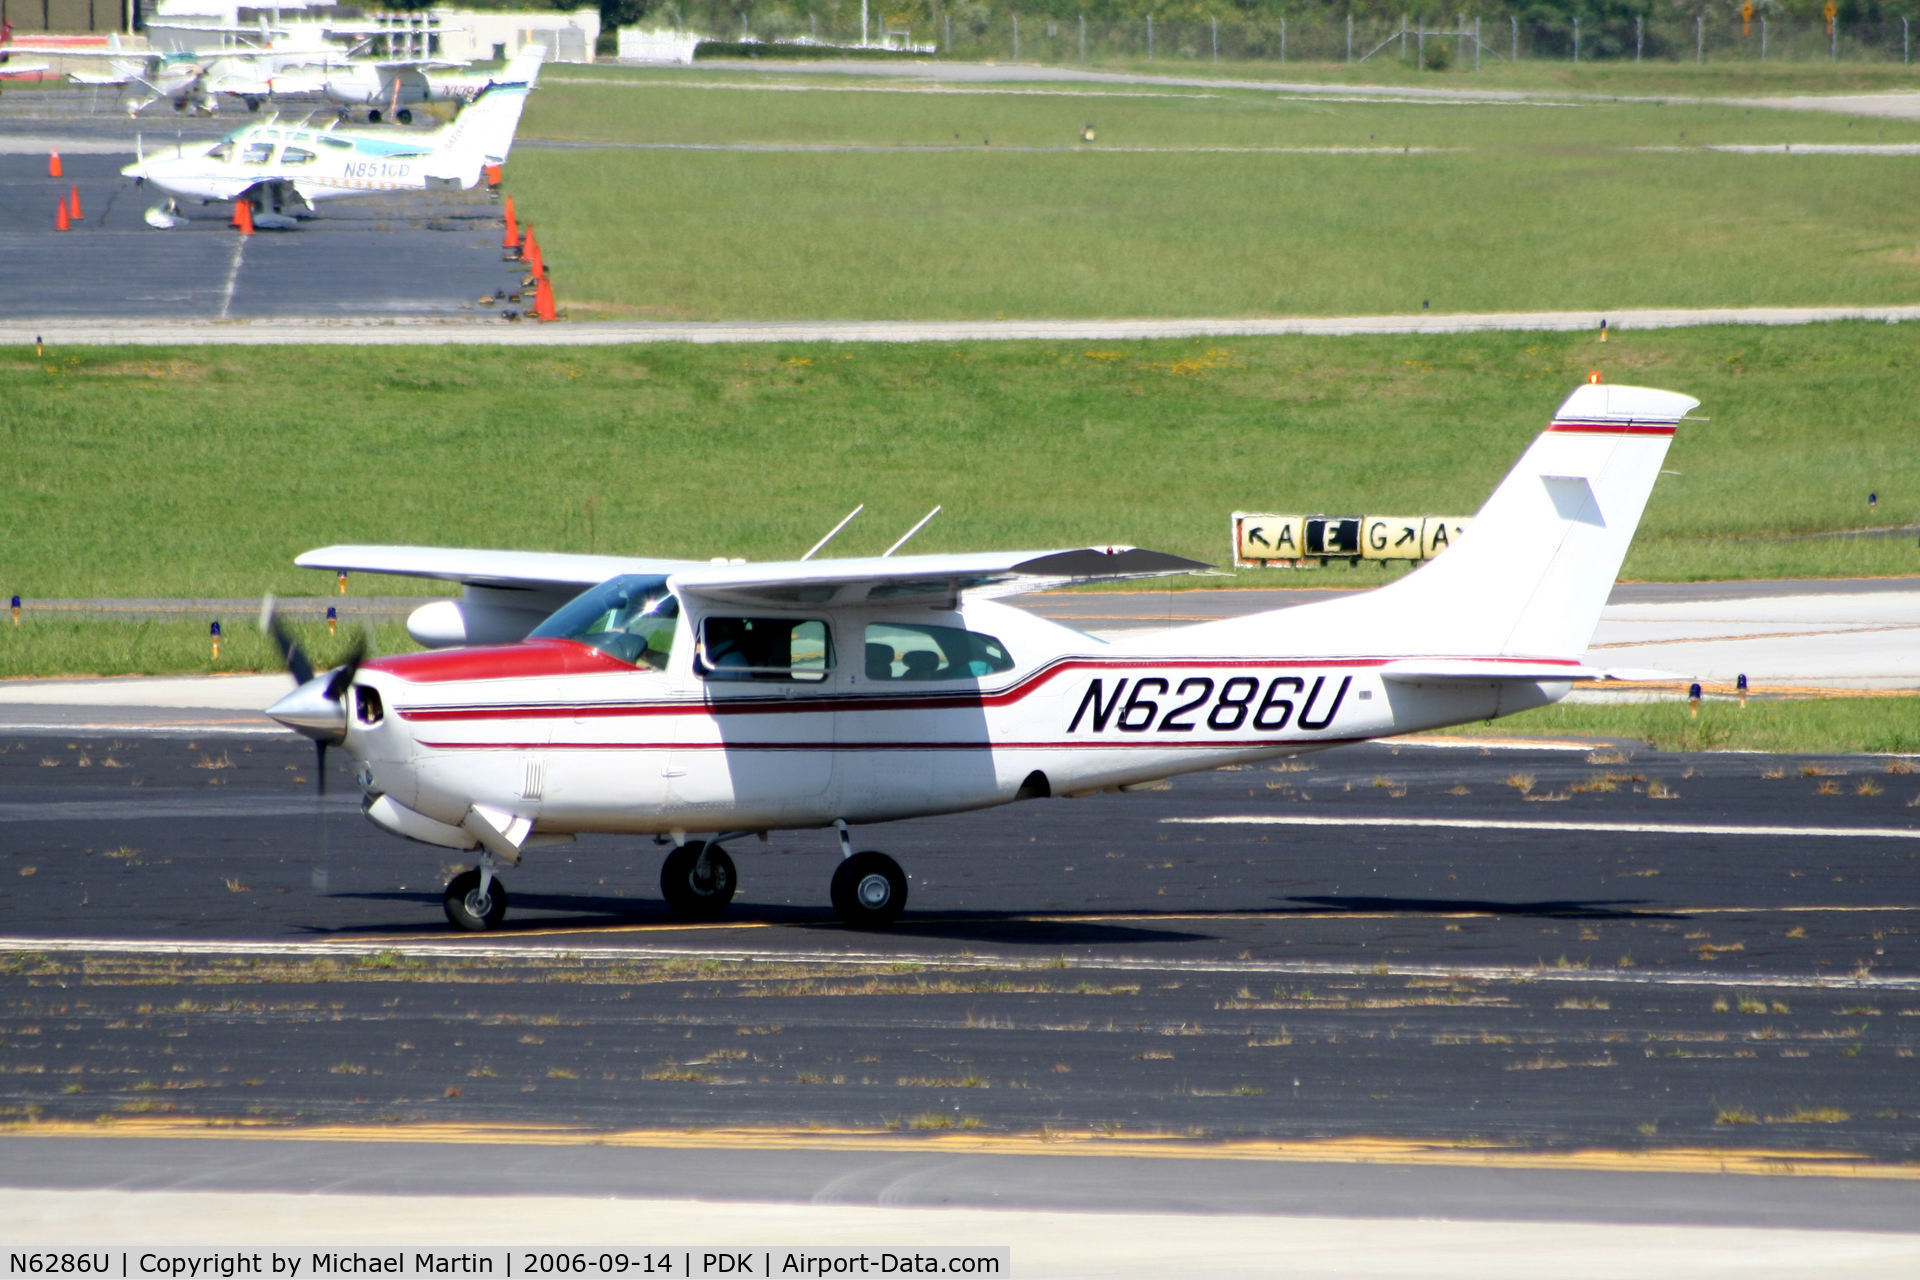 N6286U, 1985 Cessna T210R Turbo Centurion C/N 21064930, Taxing to Epps Air Service